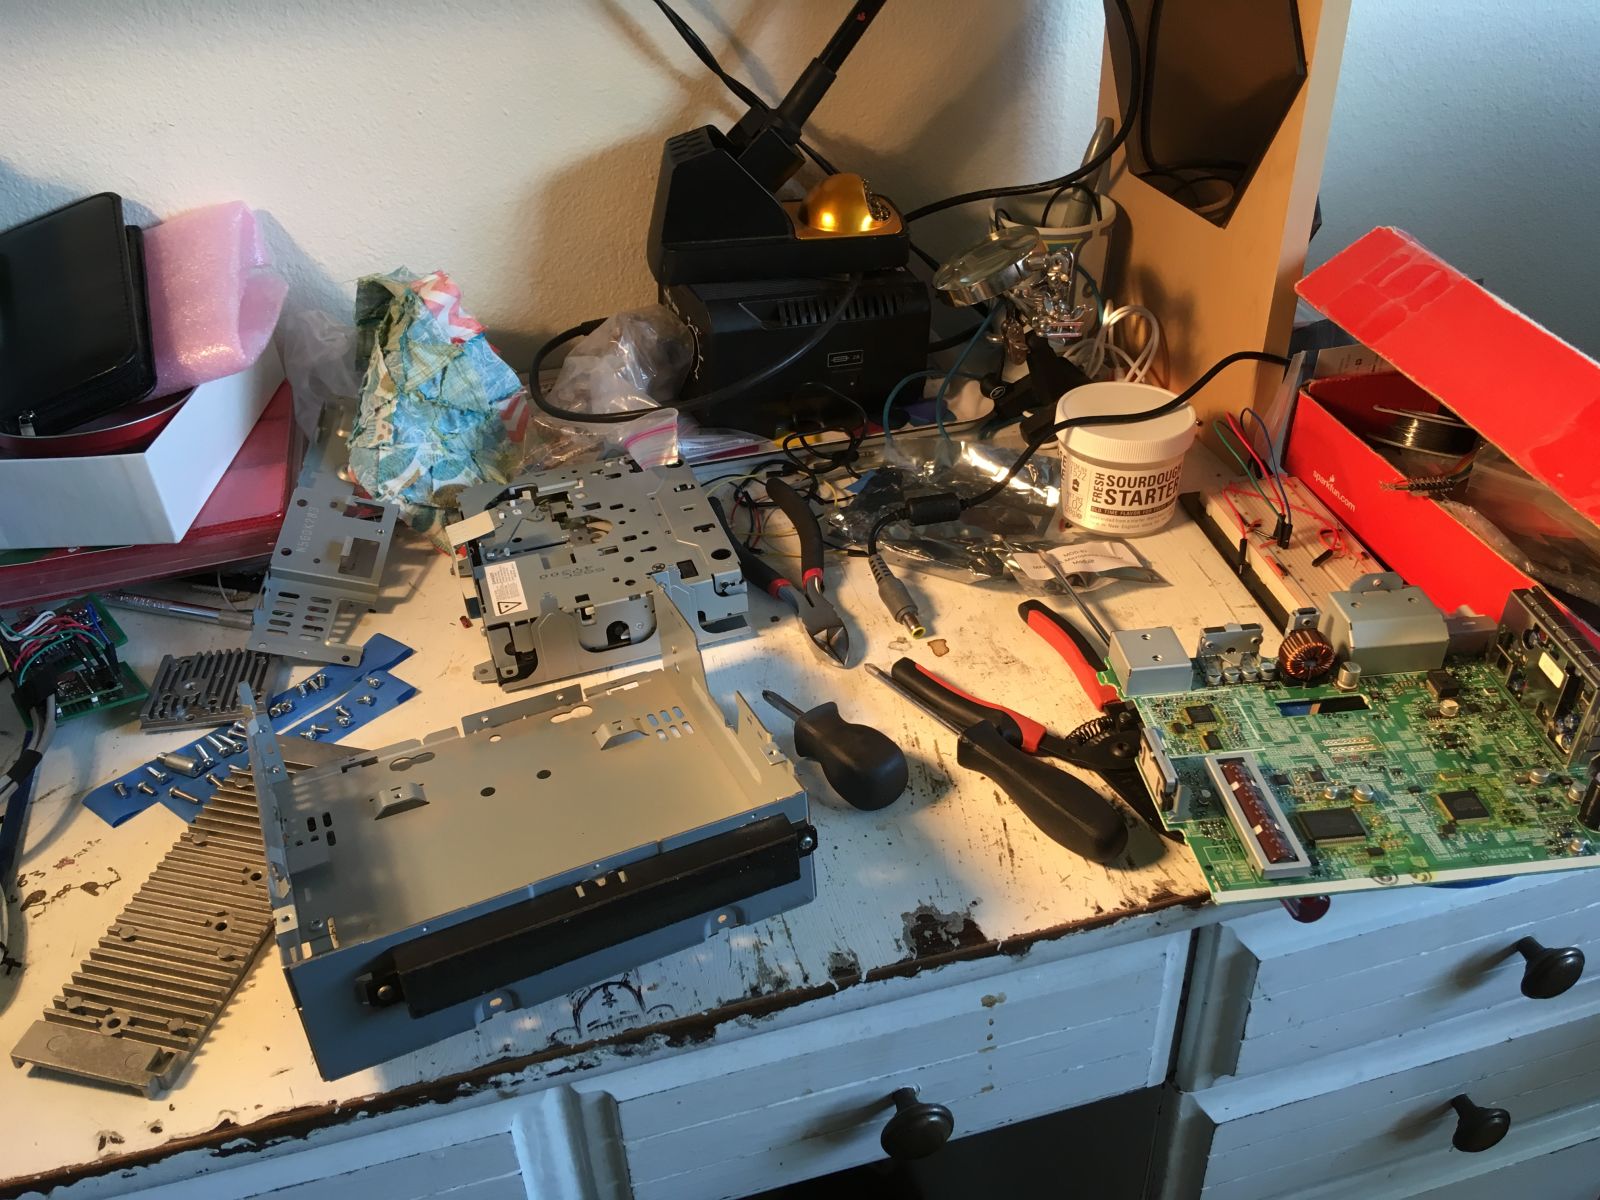 Various parts of the stereo system strewn about my work desk